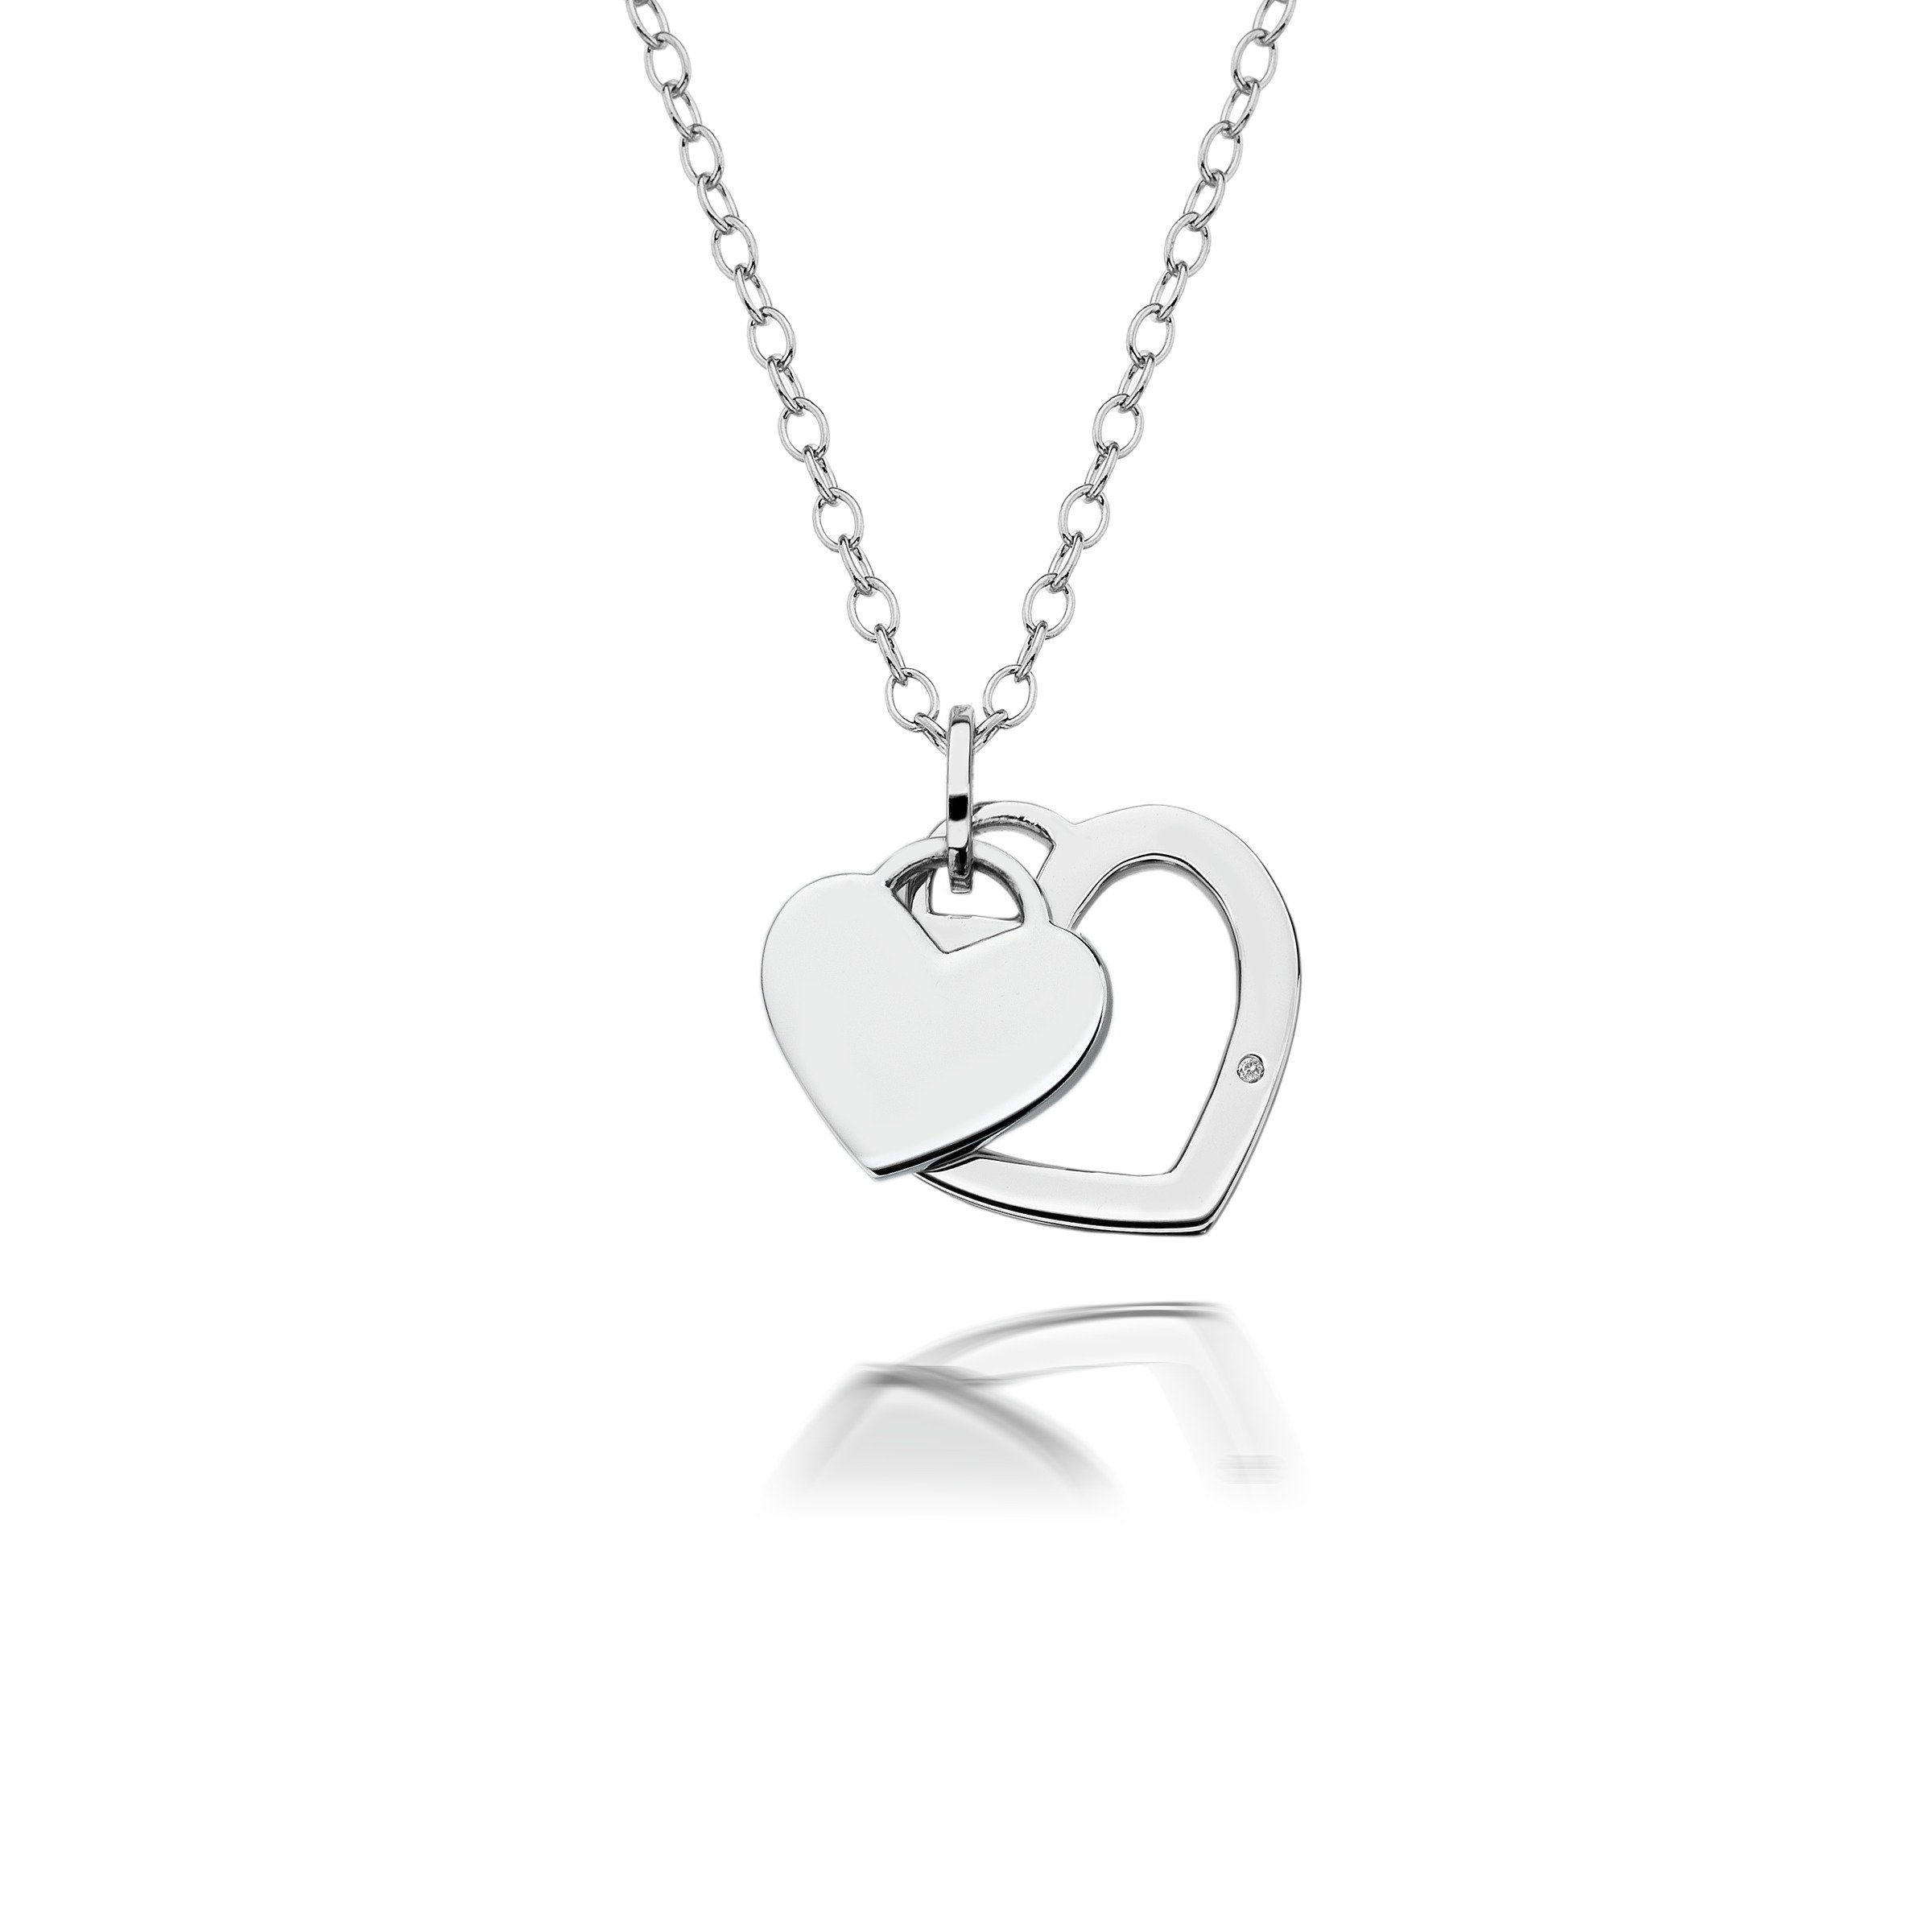 Accents by Hot Diamonds Heart Pendant Necklace